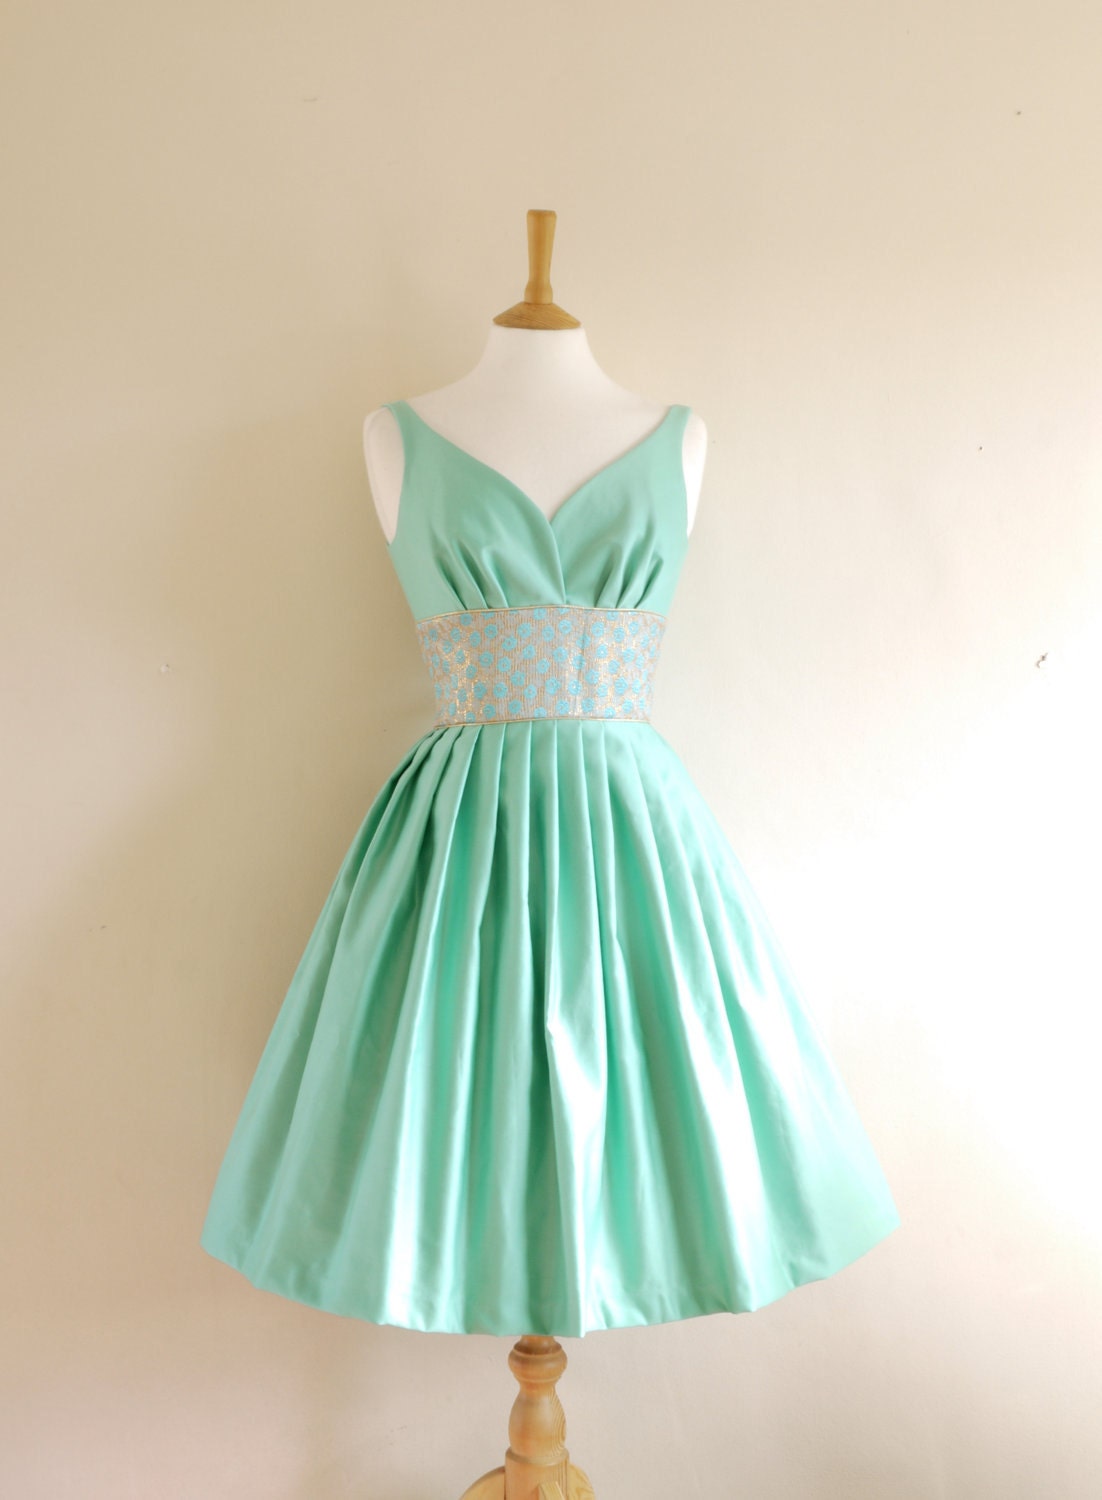 Size UK 8 (US 4-6) - Mint Green Cotton Satin Prom Dress - Made by Dig For Victory